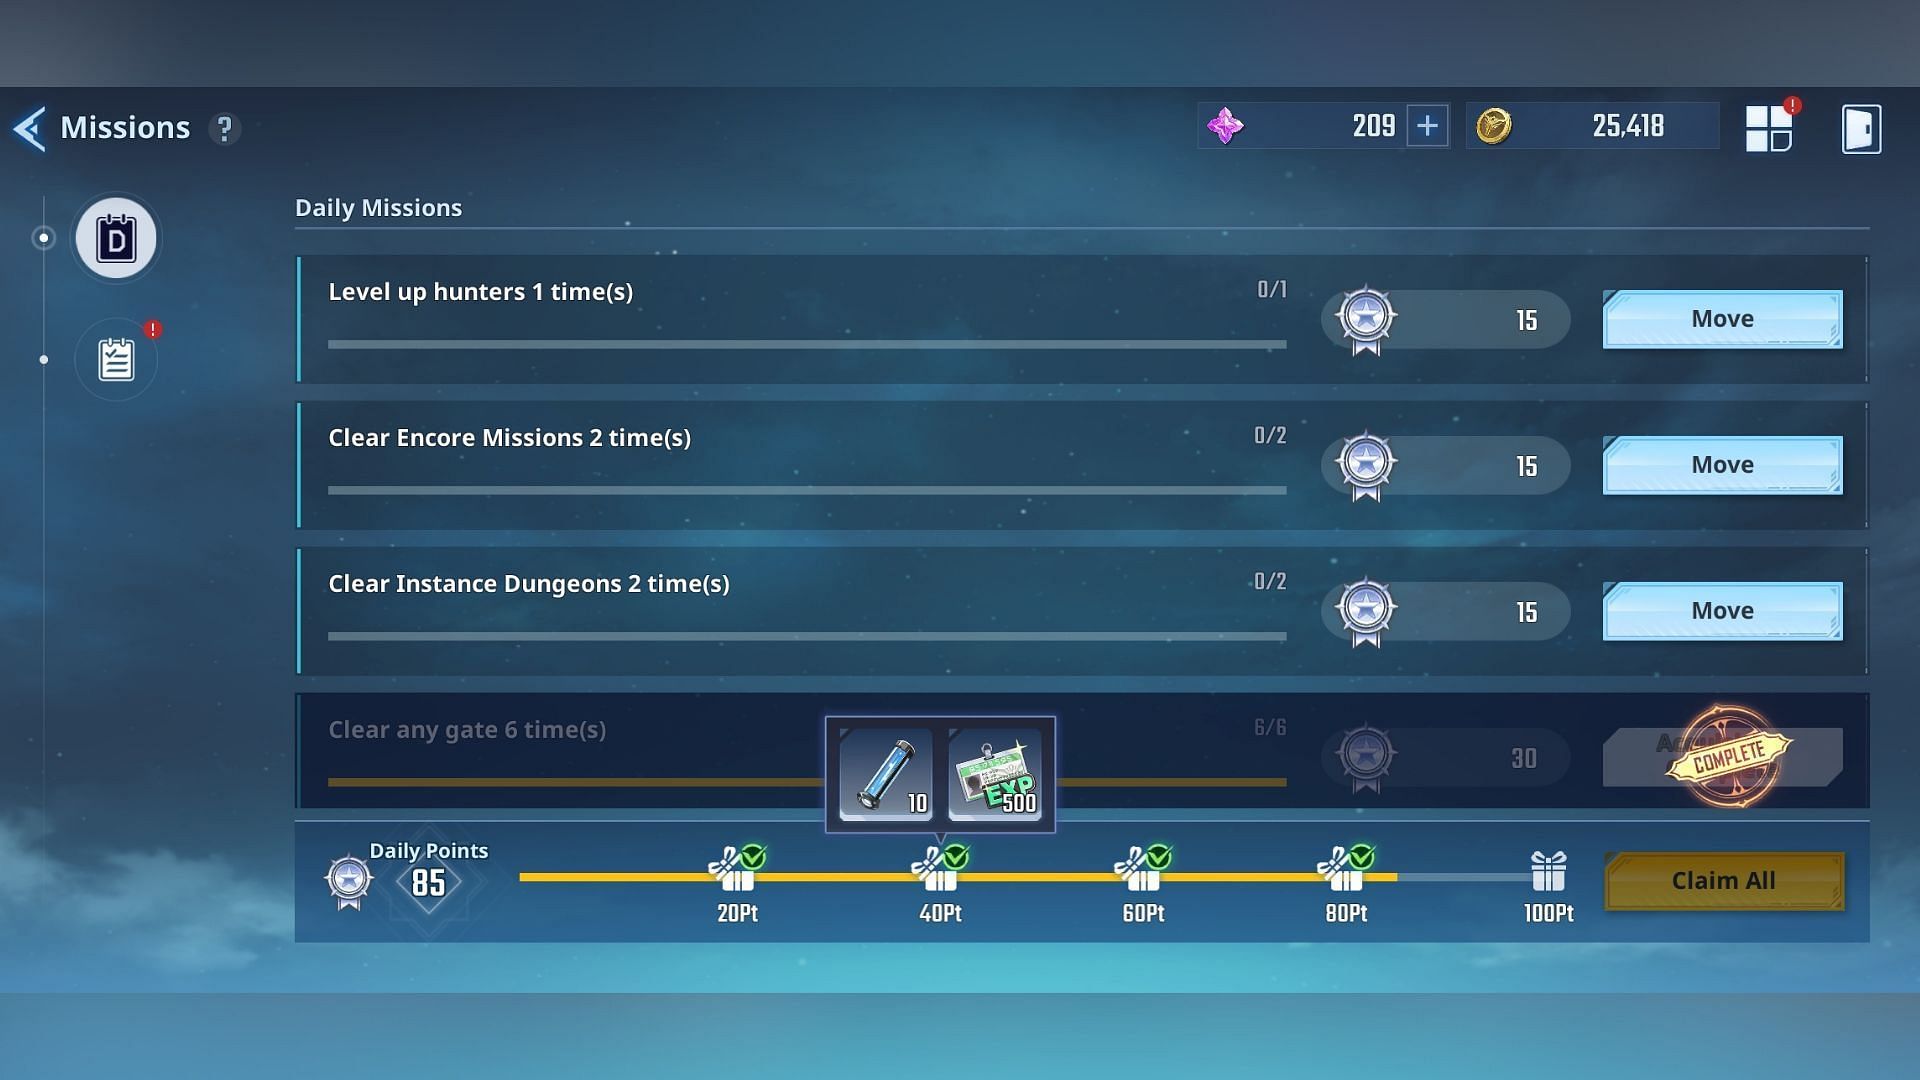 You can get 10 Weapon Enhancement Gears daily by completing daily missions (Image via Netmarble)